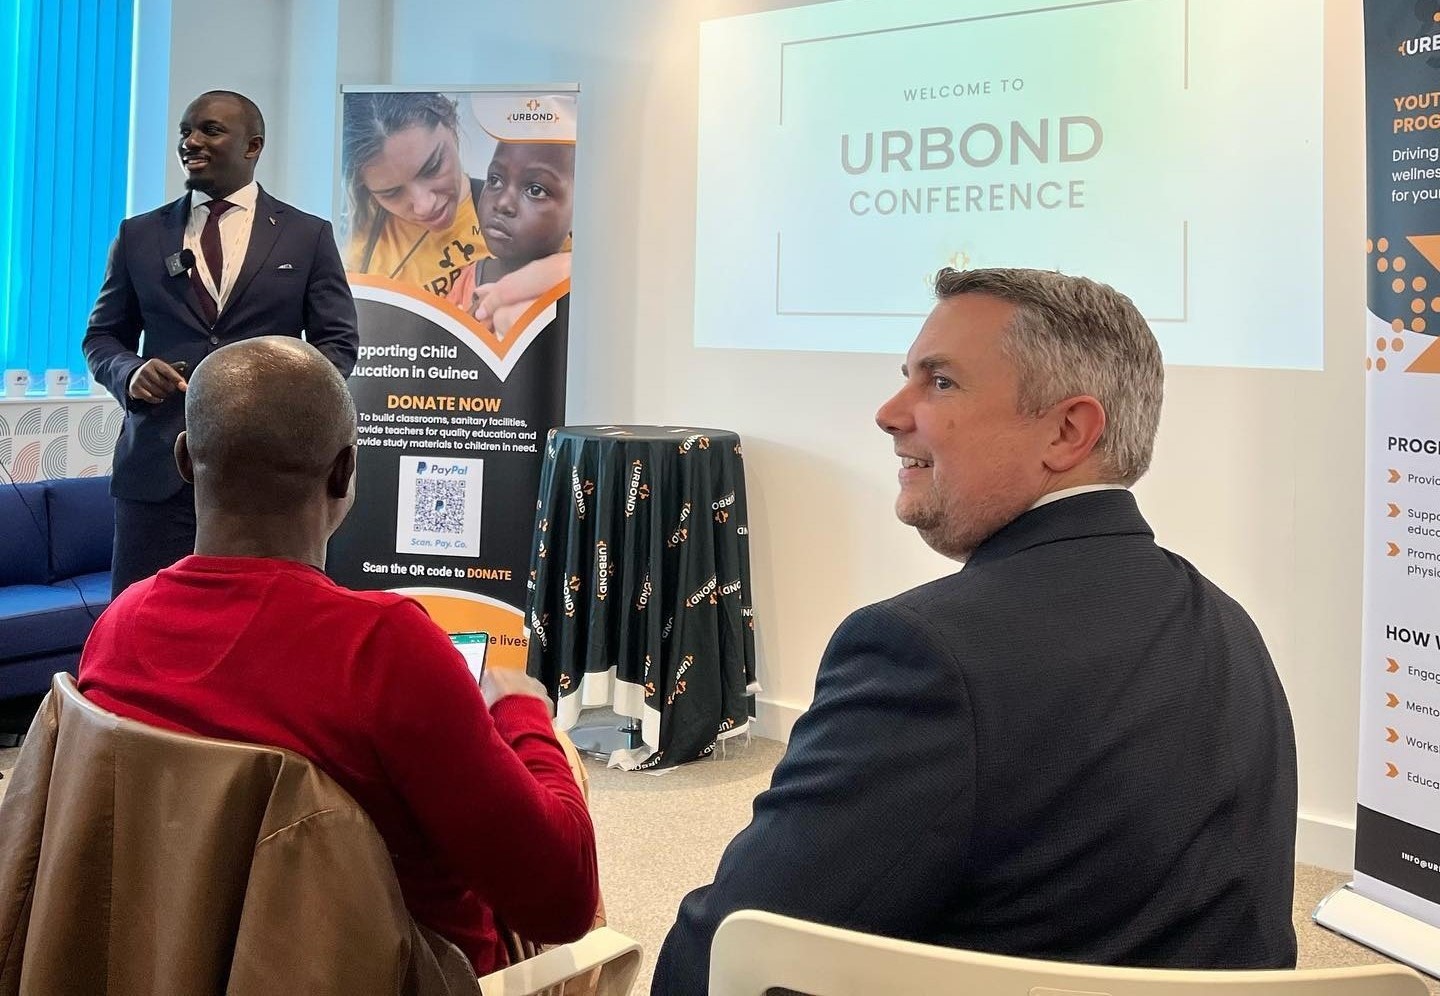 URBOND first conference